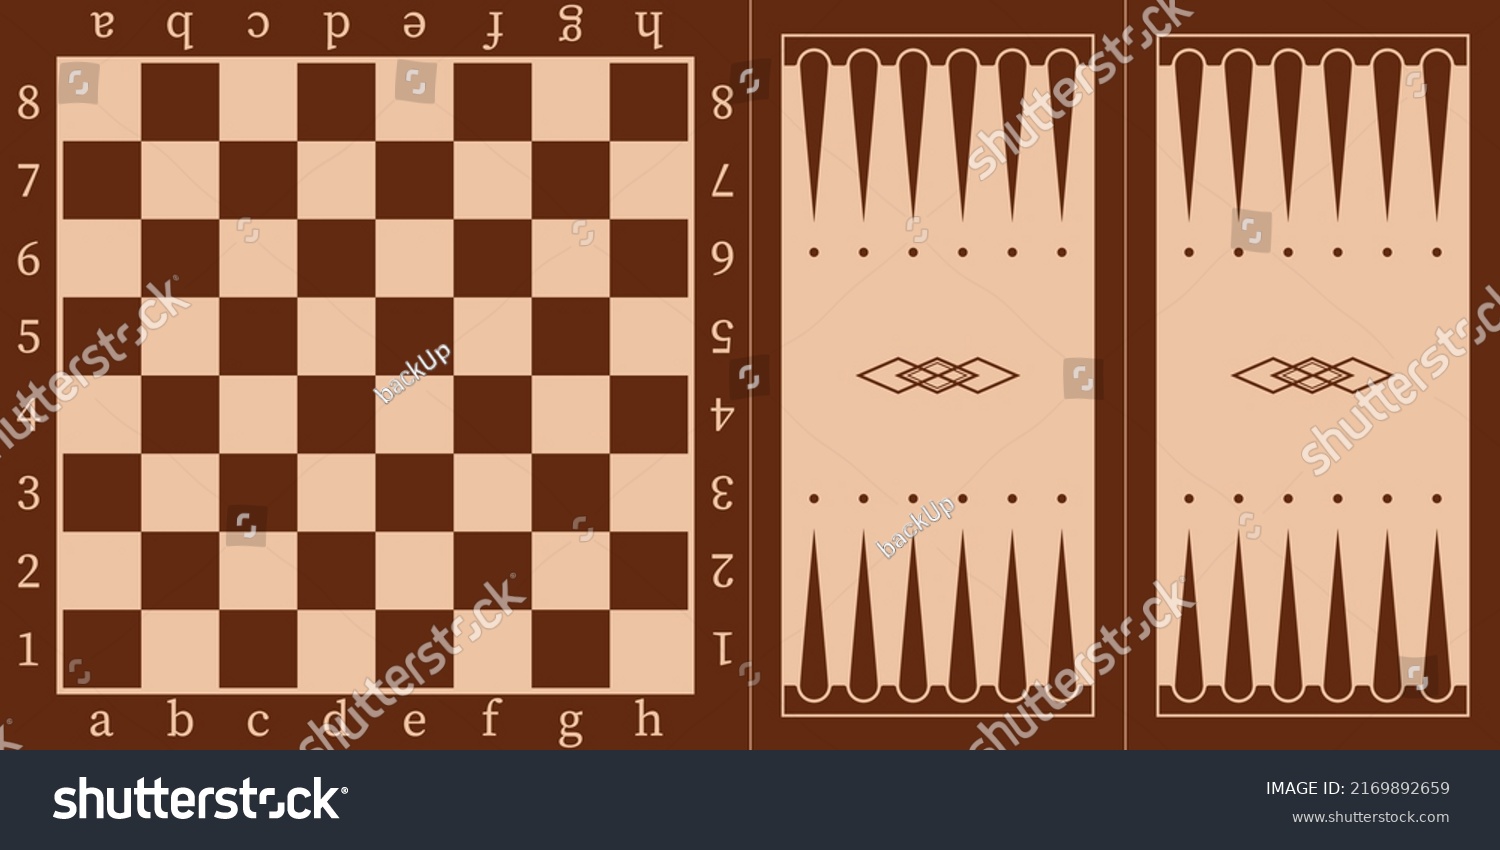 SVG of Brown wooden chessboard and backgammon board for playing with chips and dice, top view vector illustration. Abstract pattern for tabletop, vintage empty checkerboard for strategy games background svg